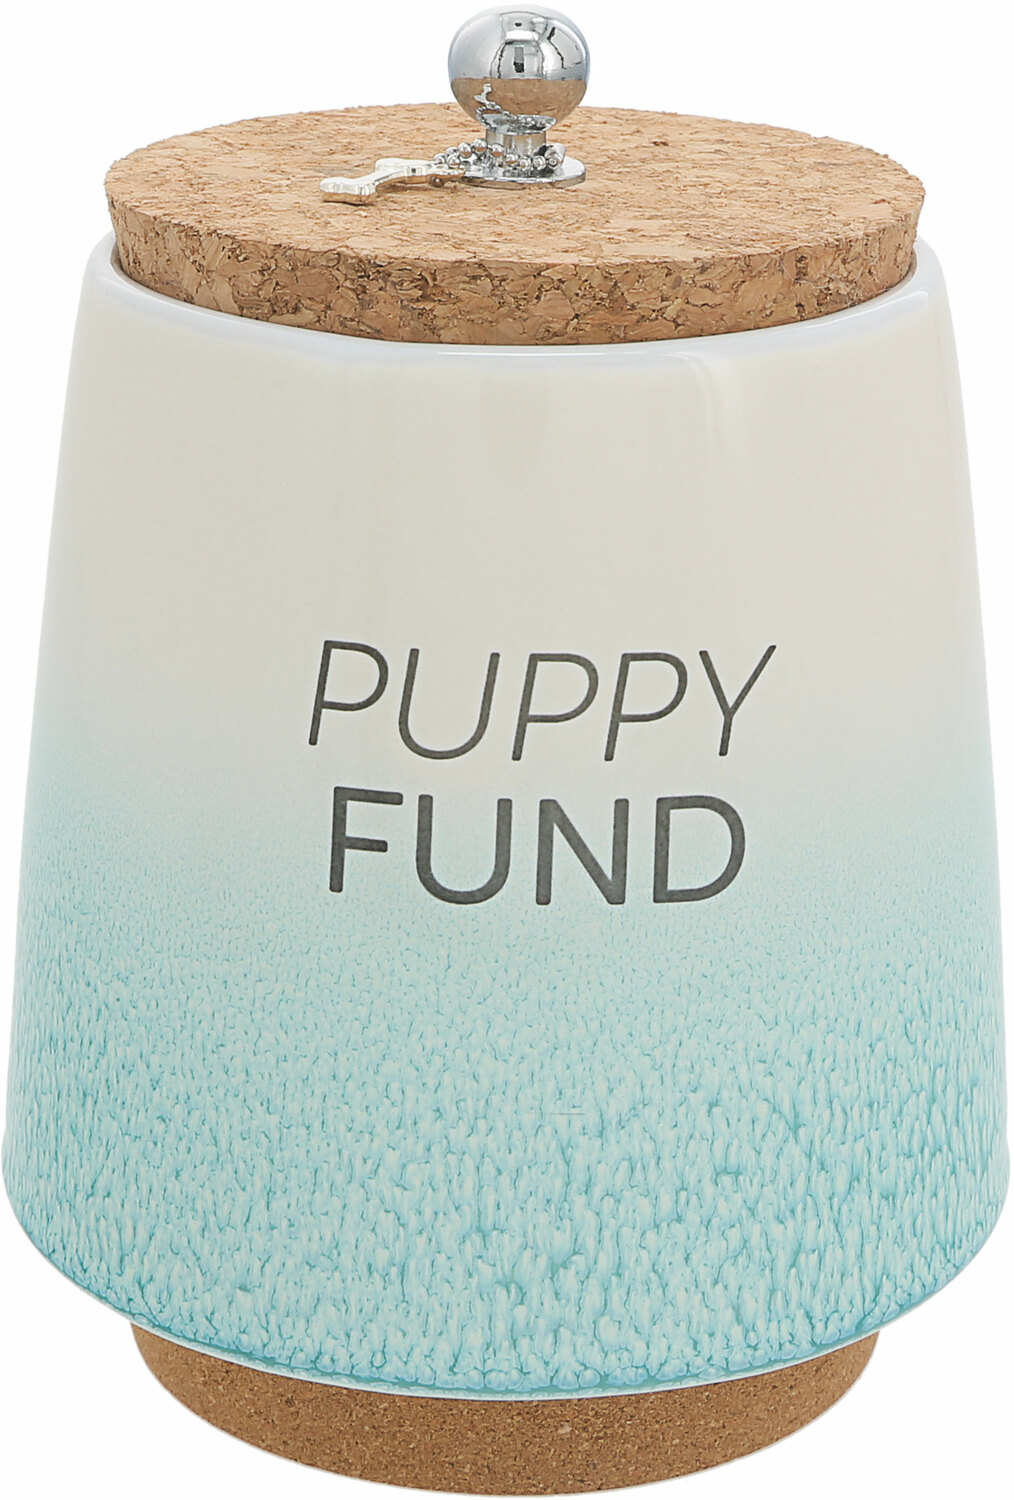 Puppy by So Much Fun-d - Puppy - 6.5" Ceramic Savings Bank